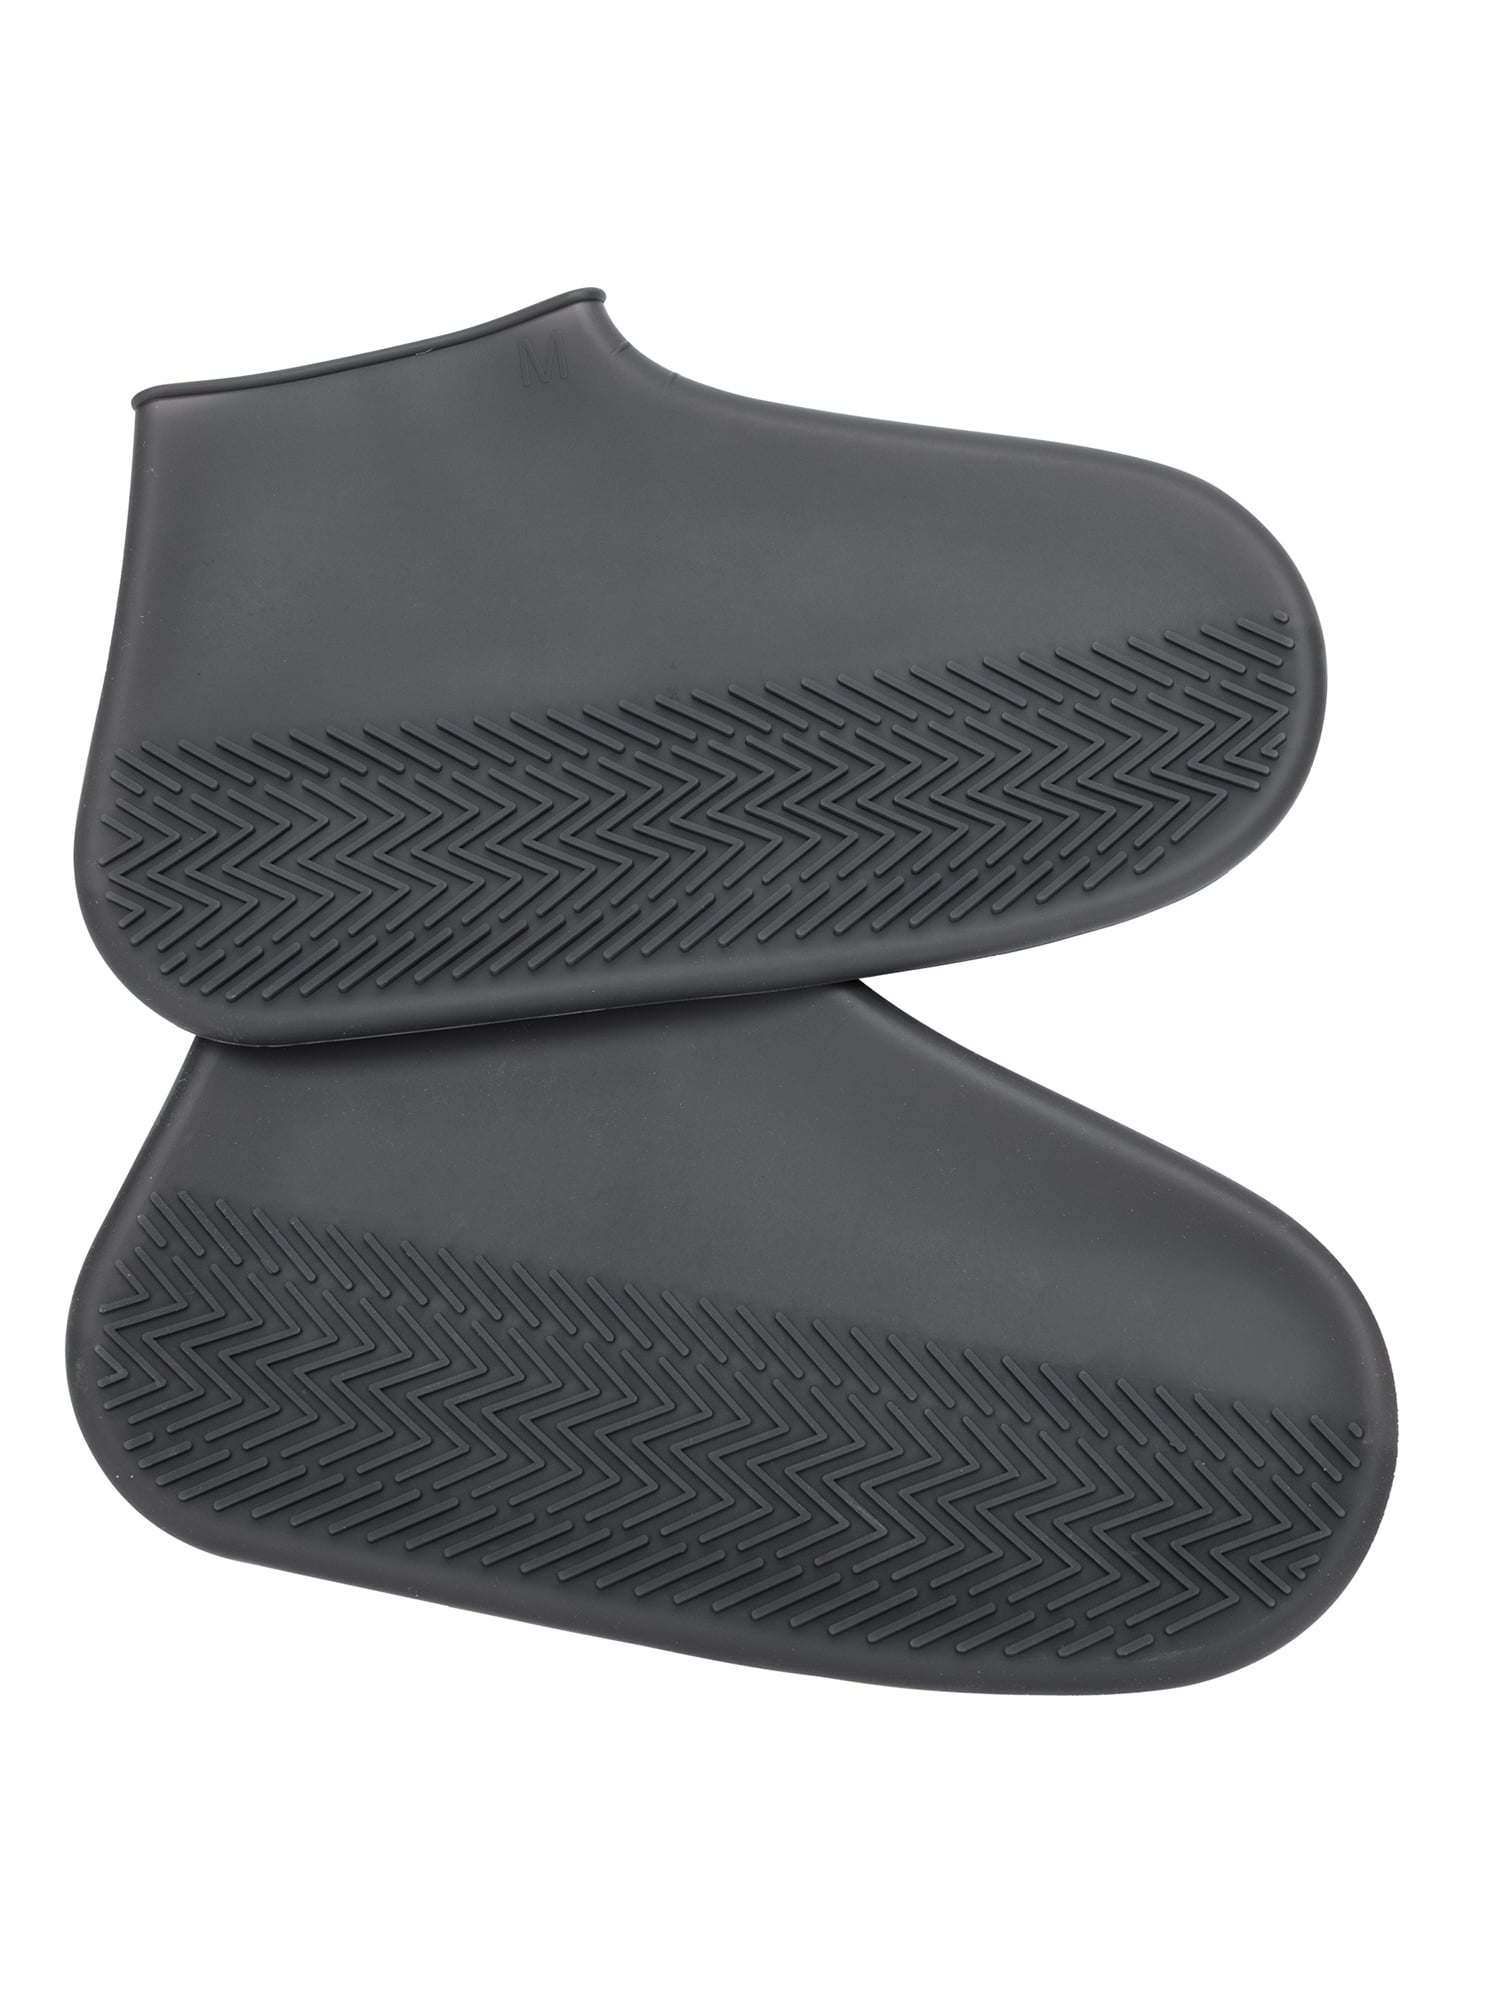 Buy > mens rubber shoe covers > in stock